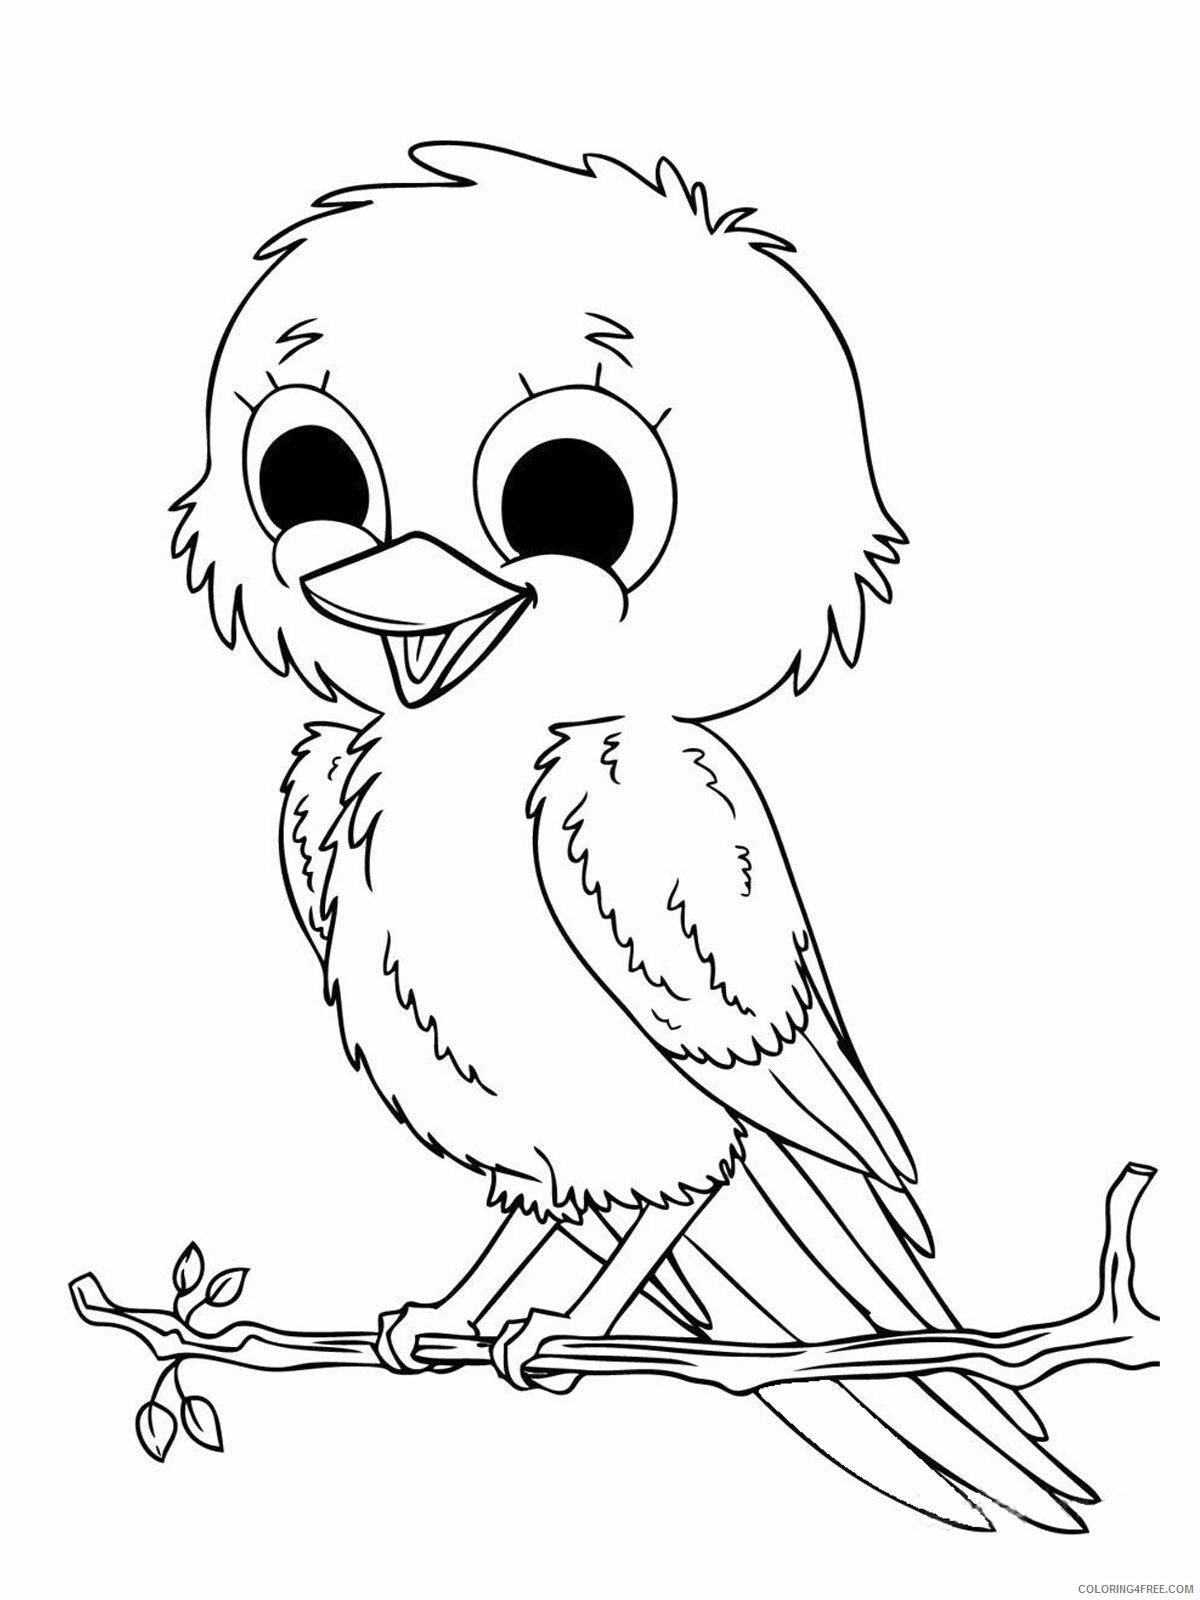 Animal Coloring Pages for Teens Printable Sheets Cute Animals Coloring 2021 a 0353 Coloring4free